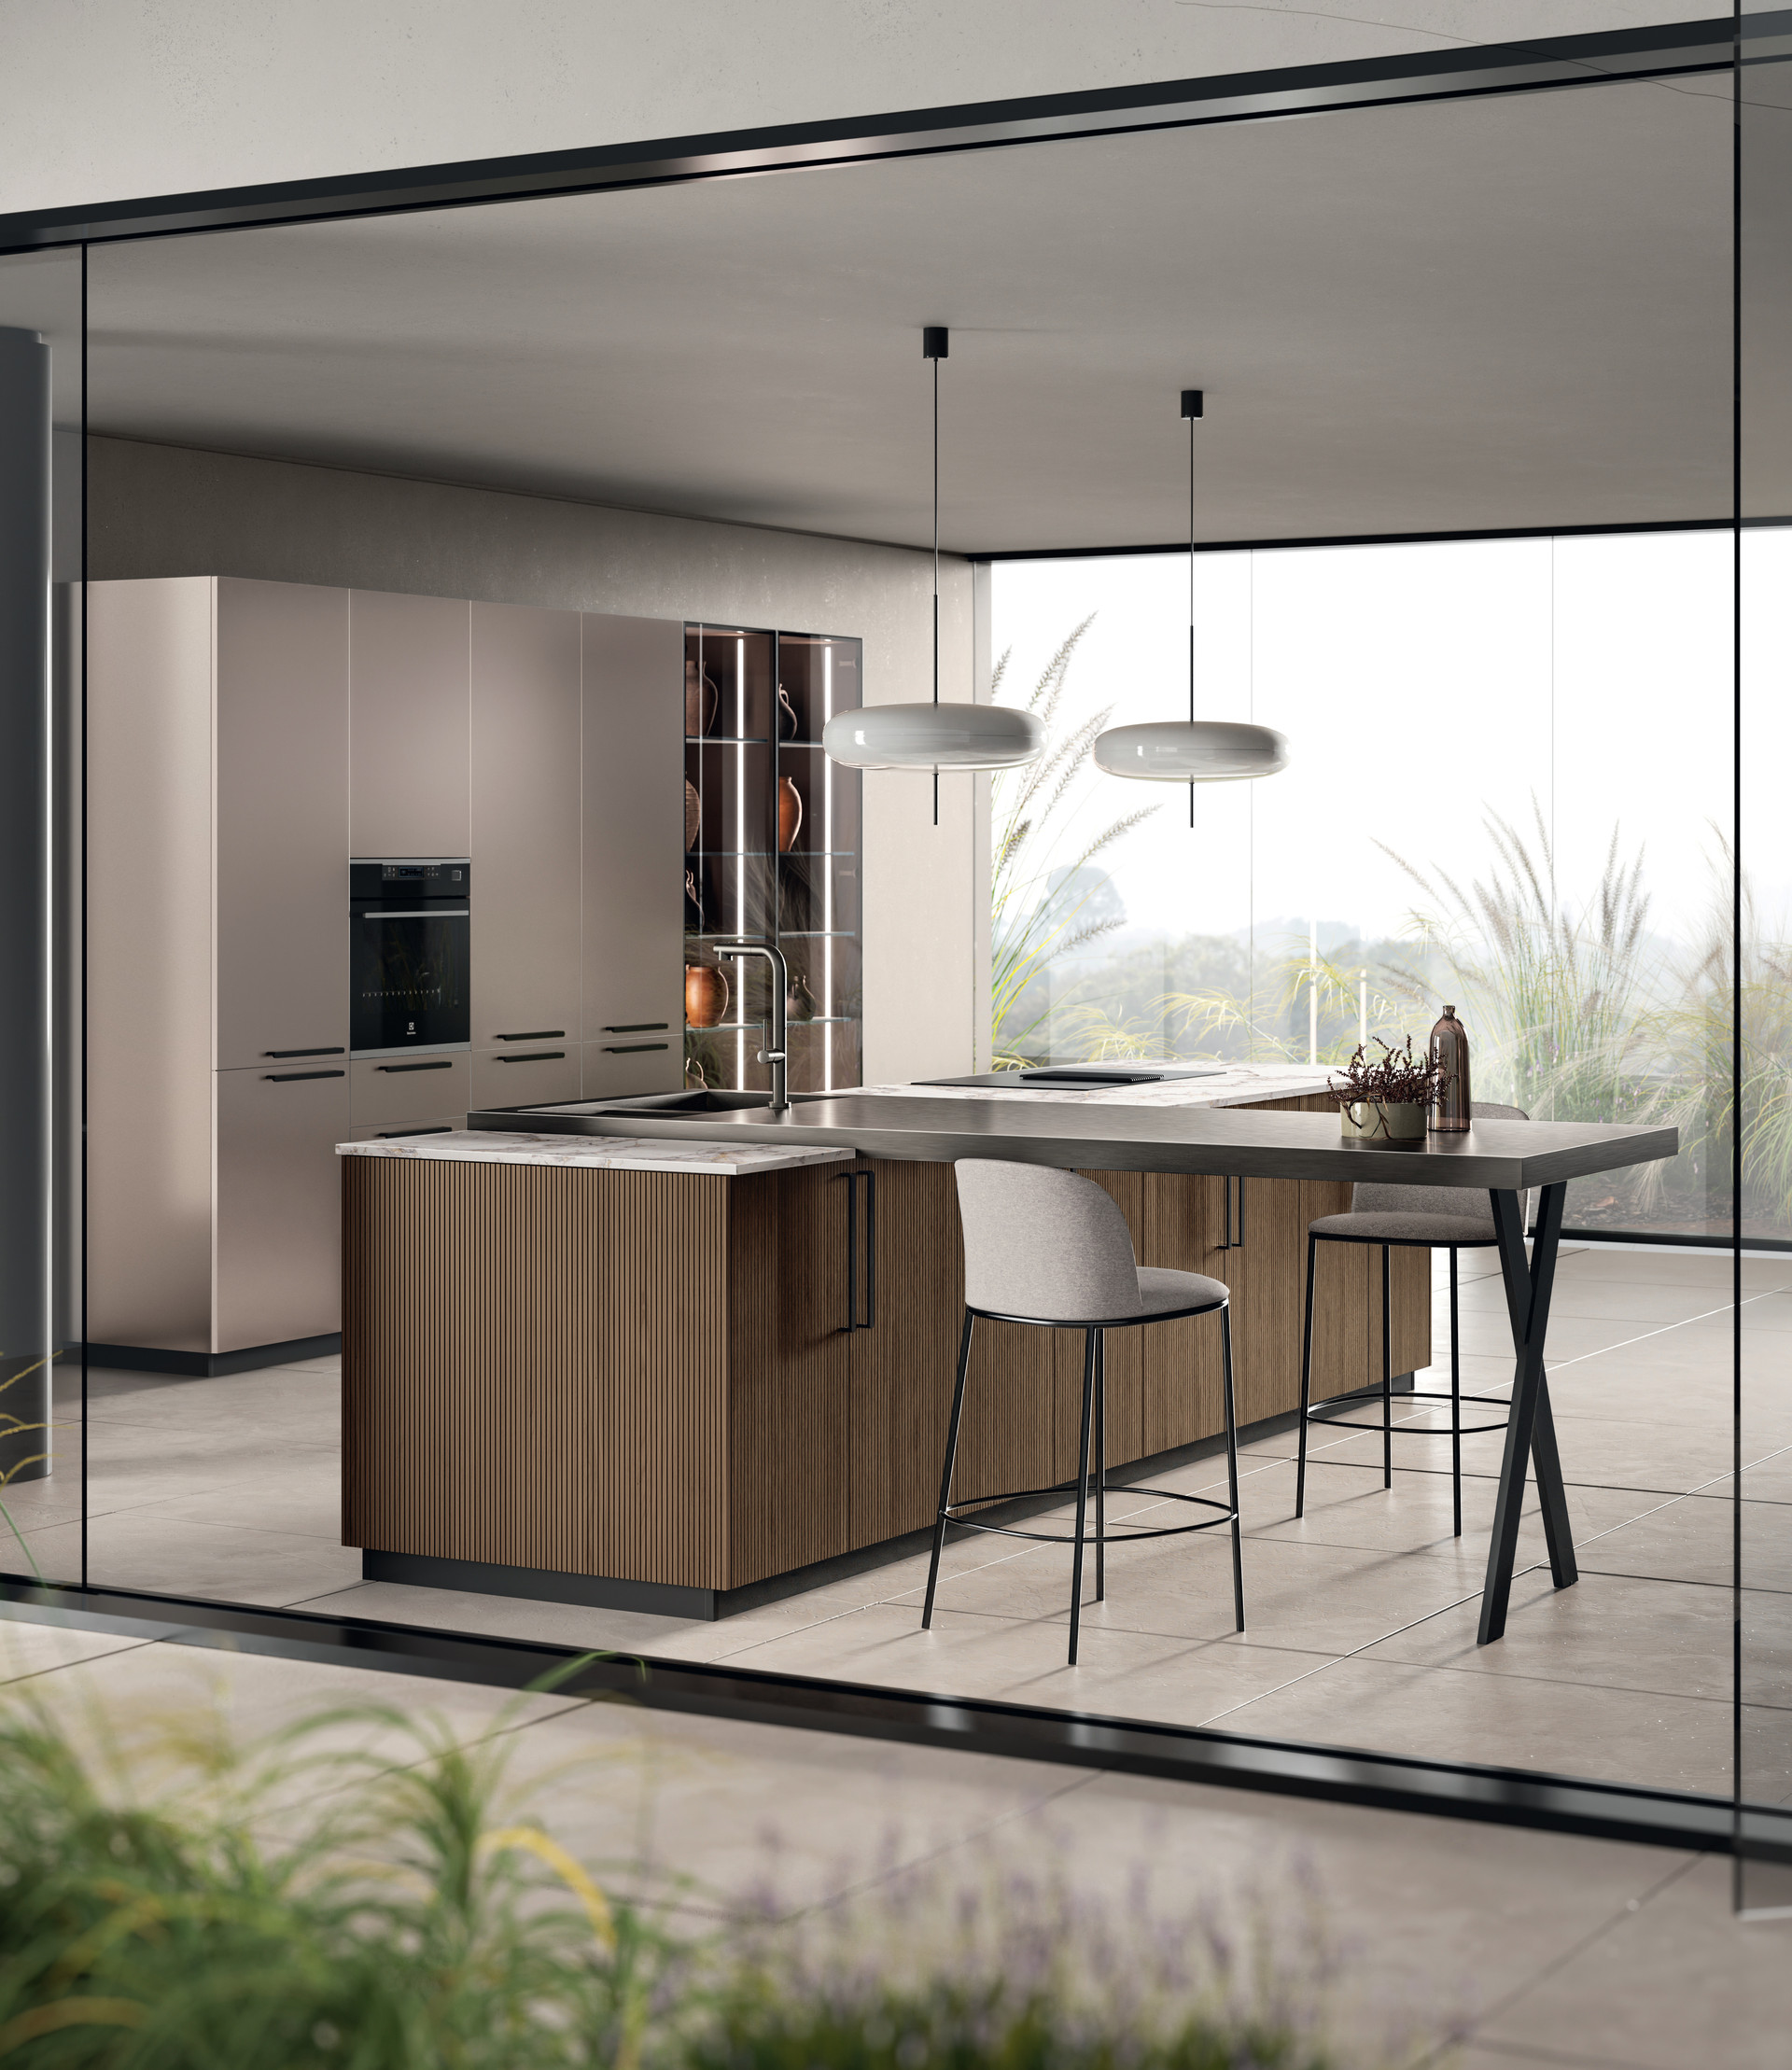 Kitchens, Bathrooms, Living Rooms and Walk in Wardrobes   Scavolini